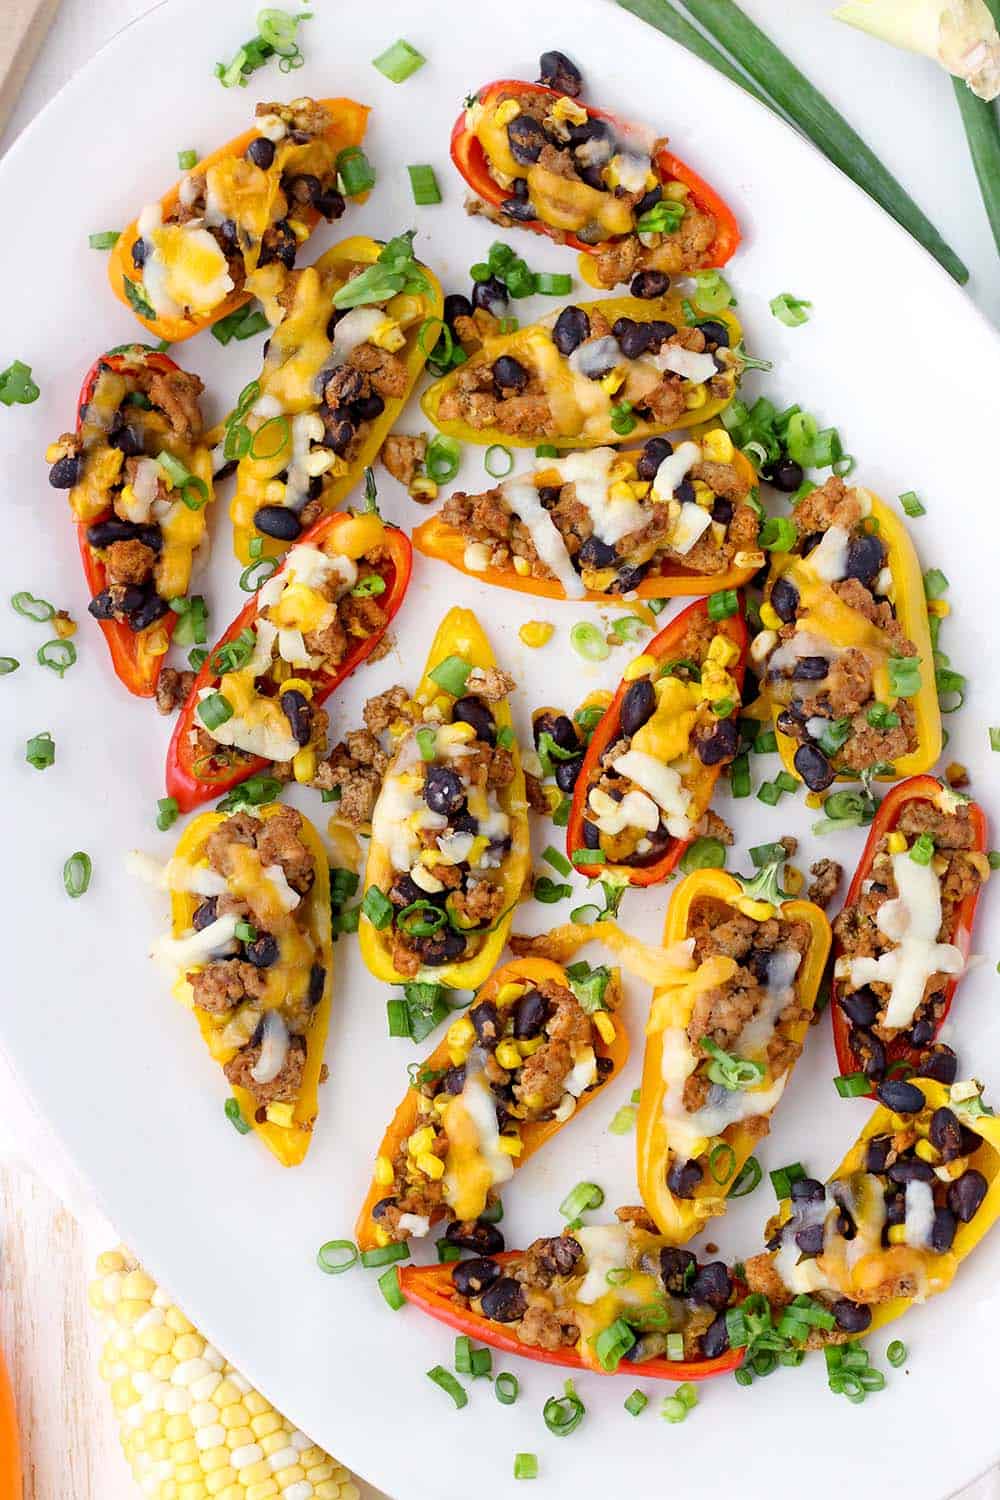 These Taco Stuffed Mini Peppers are the perfect appetizer or light meal! The sweet mini peppers are filled with slightly spicy, taco flavored ground turkey, black beans, and corn for a super fun, low-carb finger food.